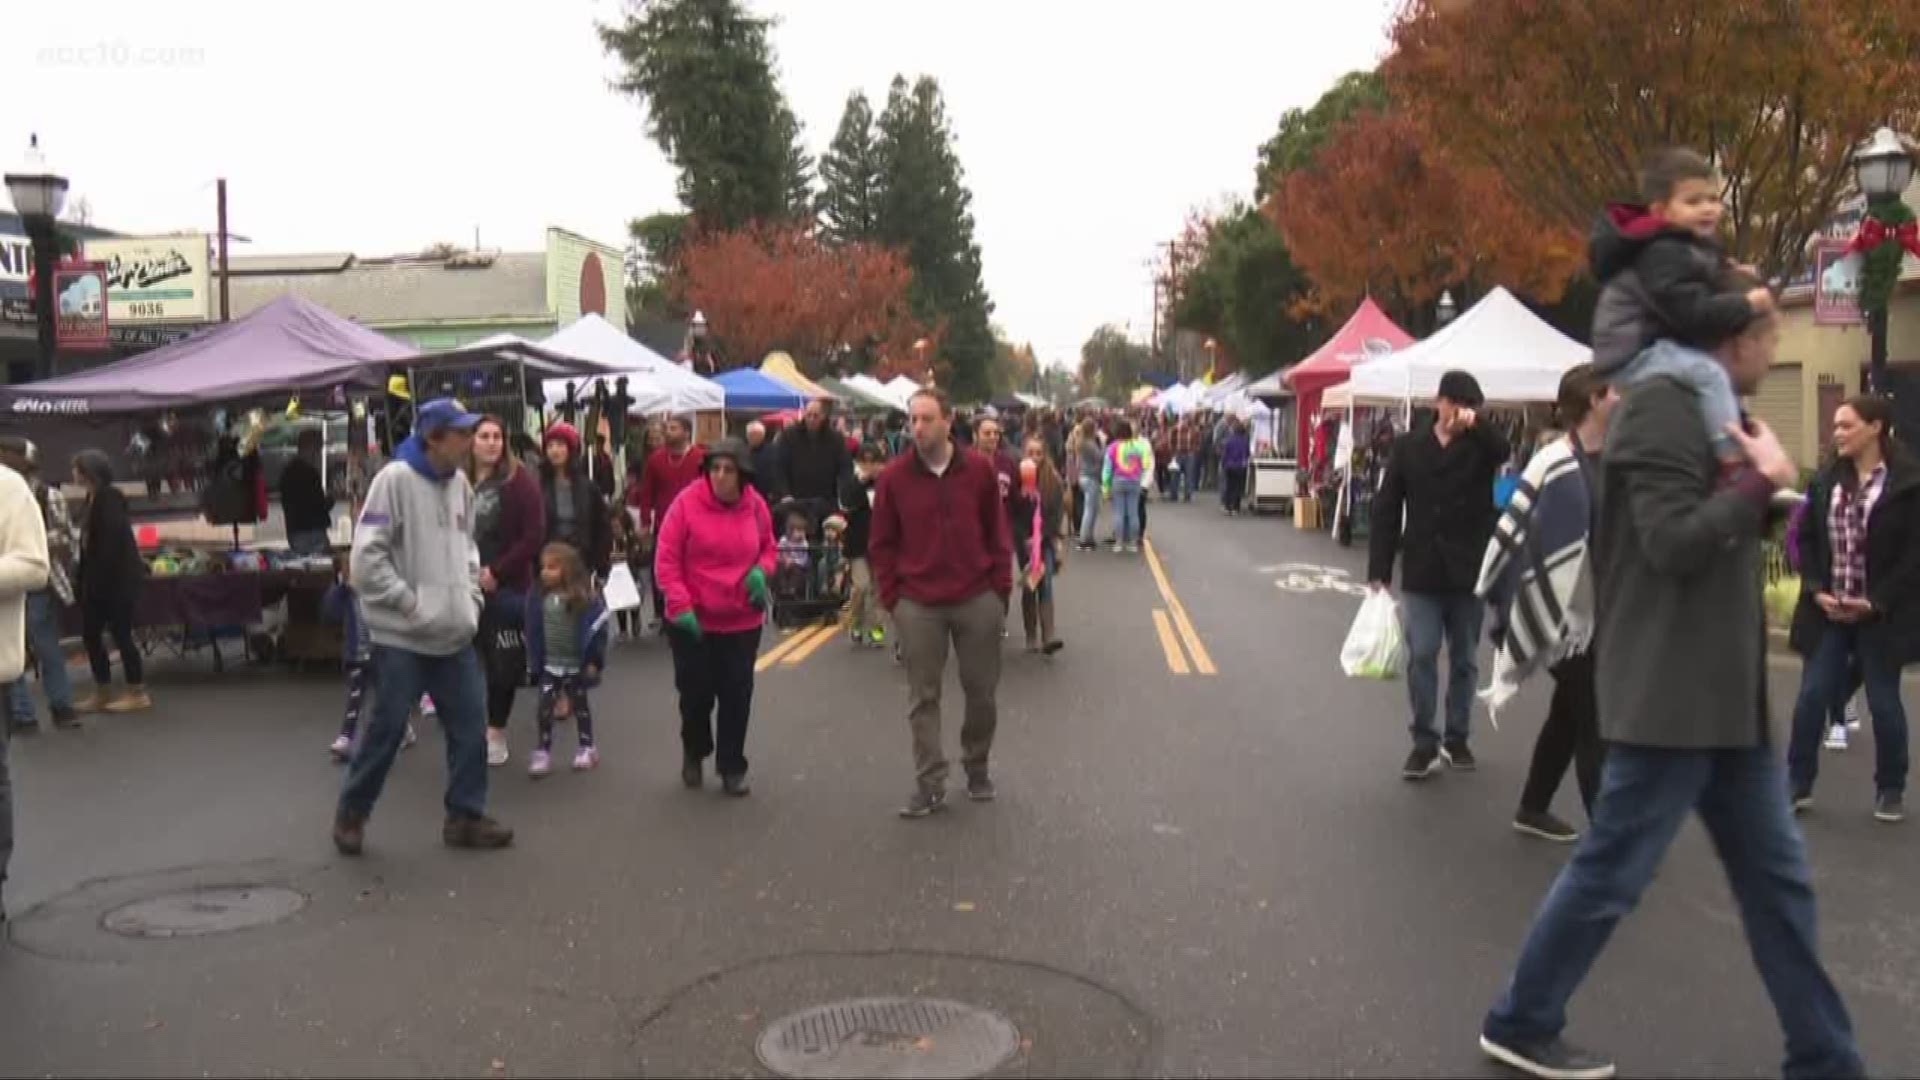 The Dickens Street Faire in Elk Grove attracted thousands to Elk Grove to support small business this Saturday.